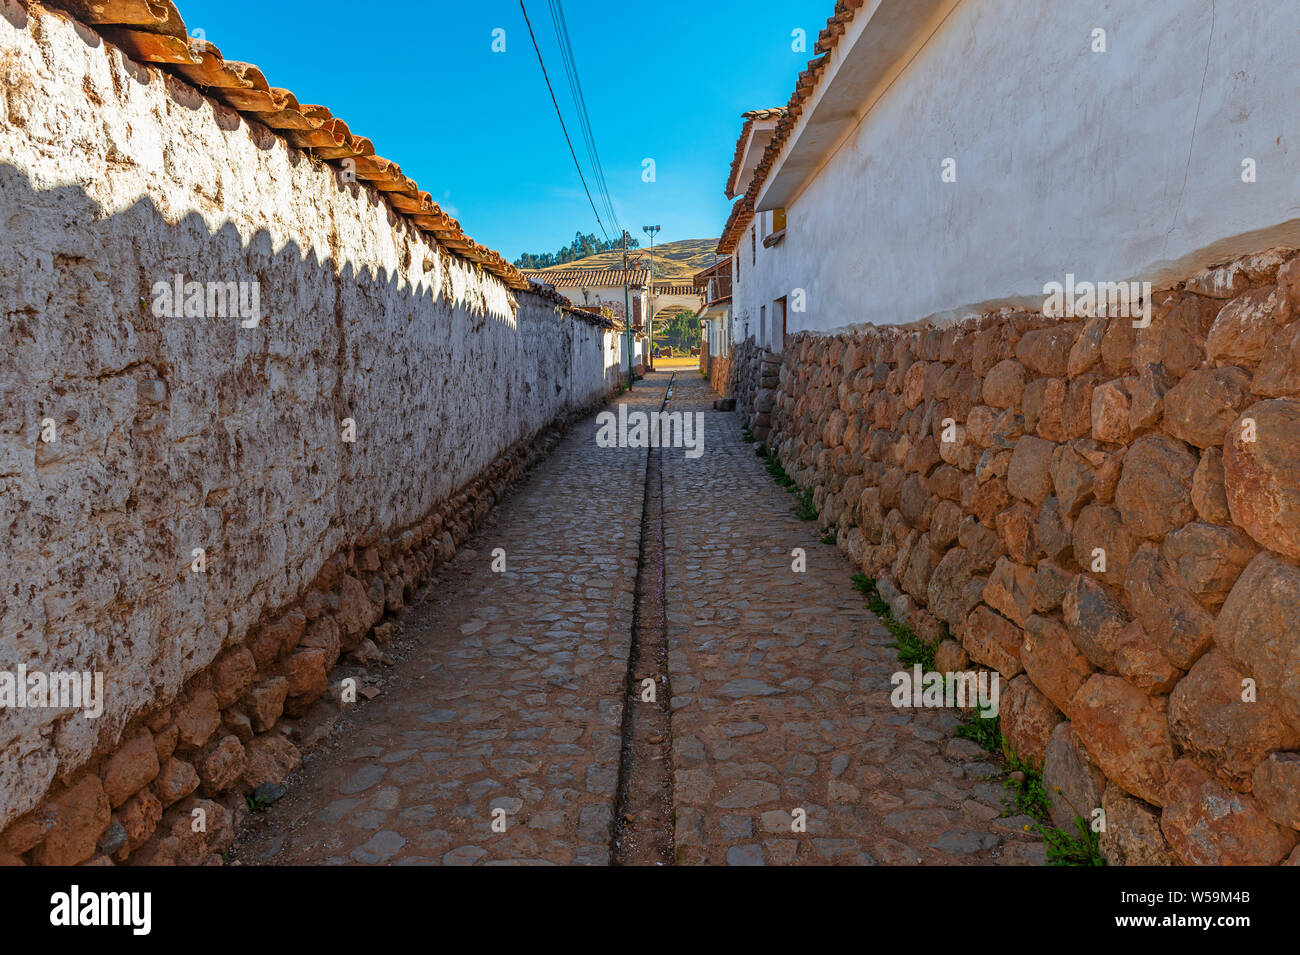 Street in the city of Chinchero in the morning with inca style wall architecture, cobblestones and water canal, Cusco Province, Peru. Stock Photo